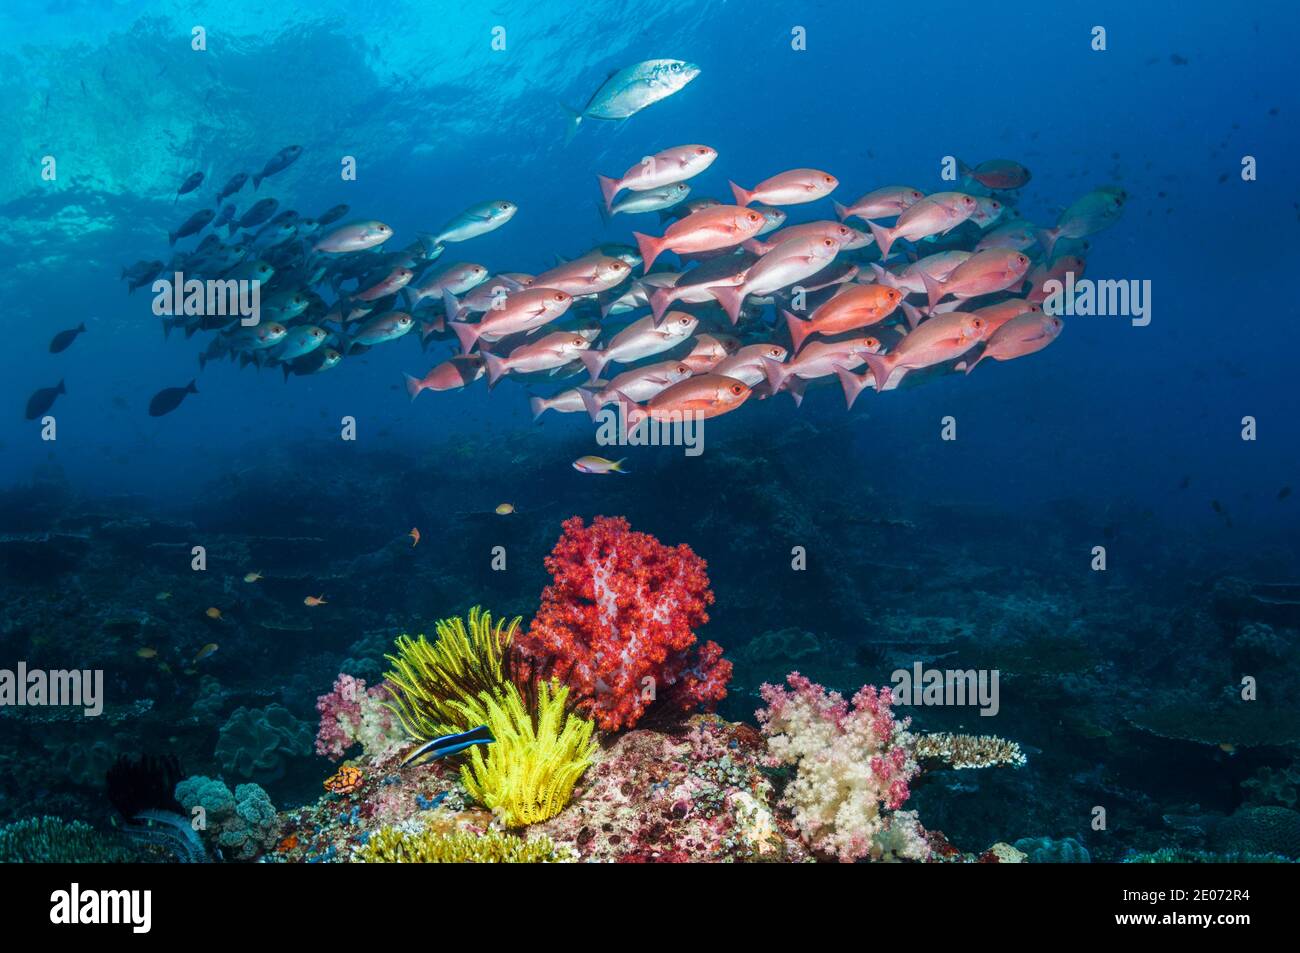 Shoal of Slender pinjalo snappers, White-spot pinjalo snapper or Red pinjalo [Pinjalo lewisi] swimming over soft corals on coral reef.  West Papua, In Stock Photo